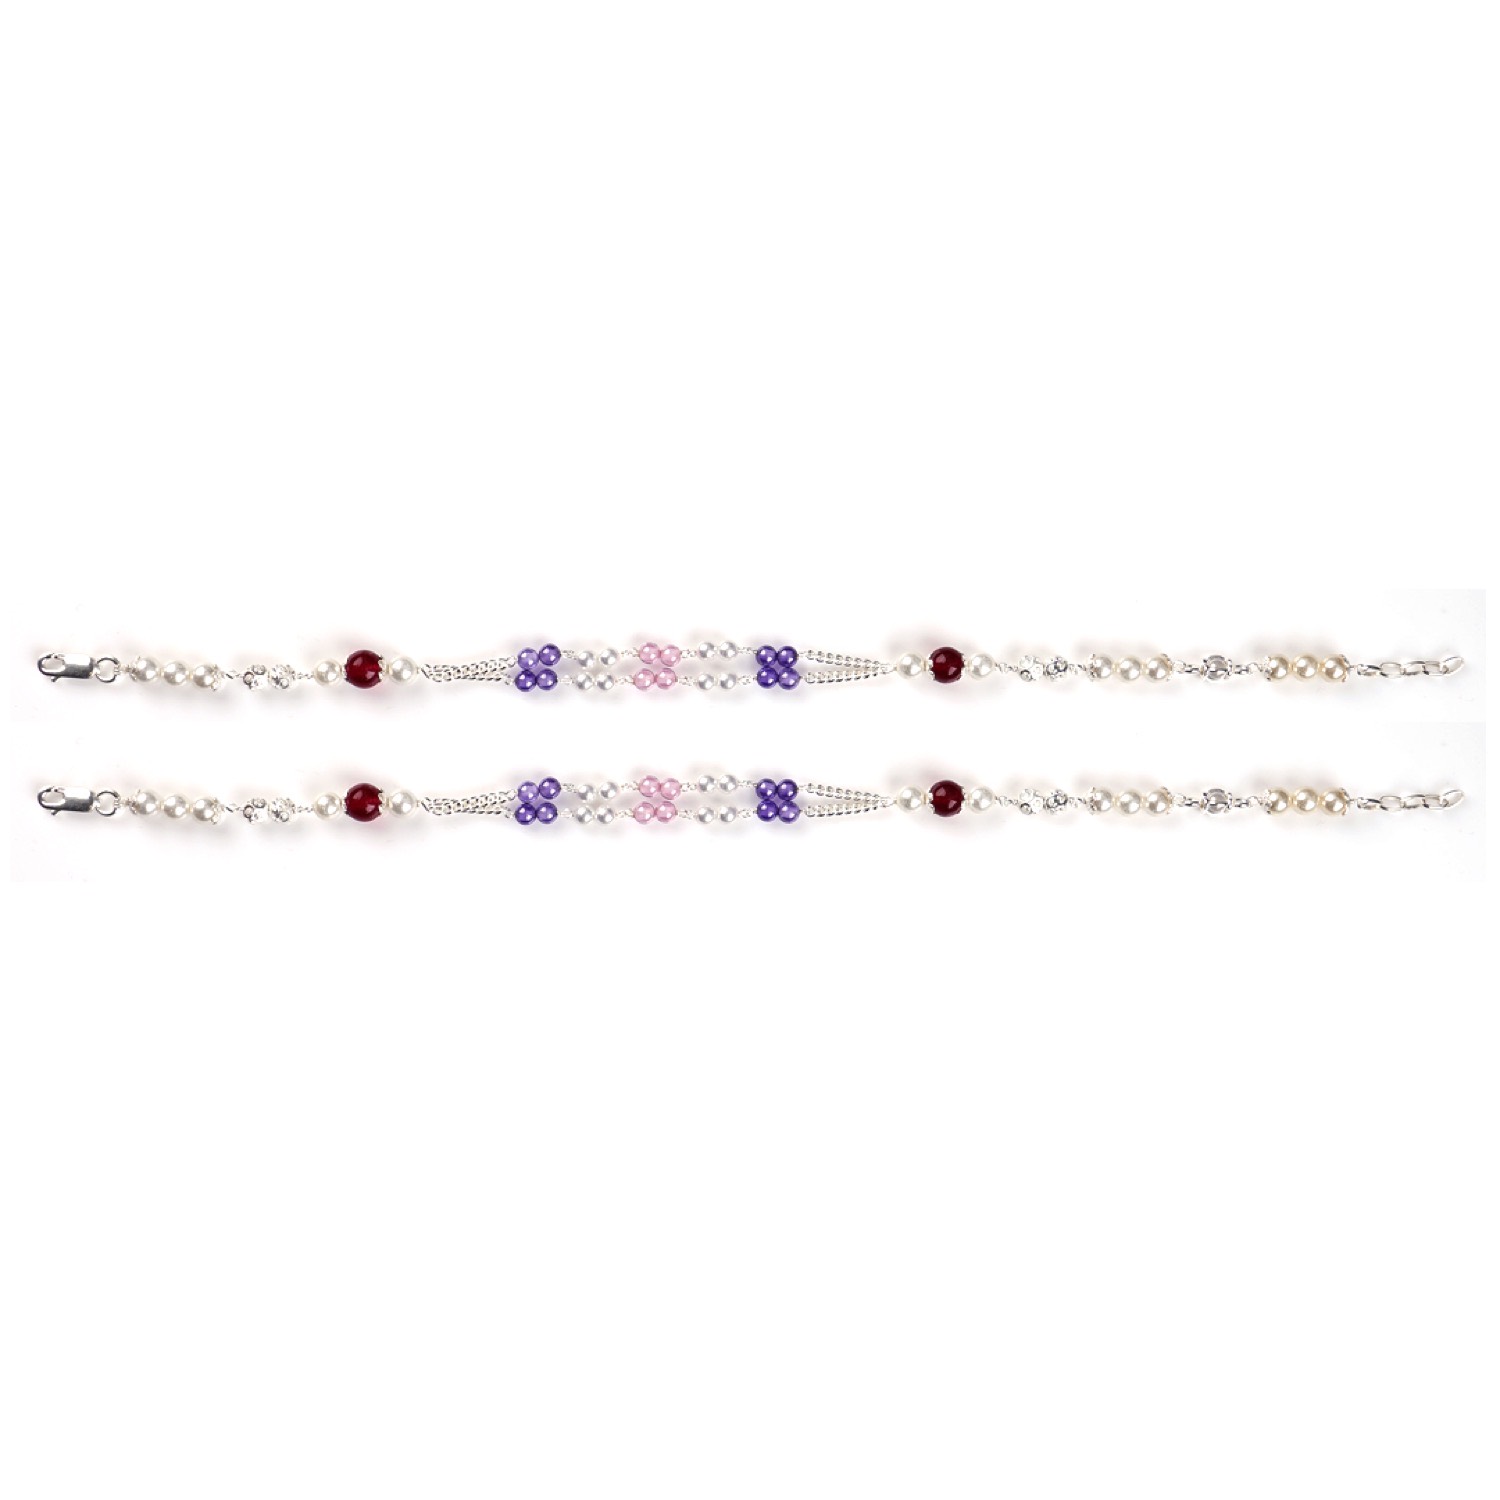 varam_anklets_072022_pink_and_purple_stone_silver_anklets_02-1